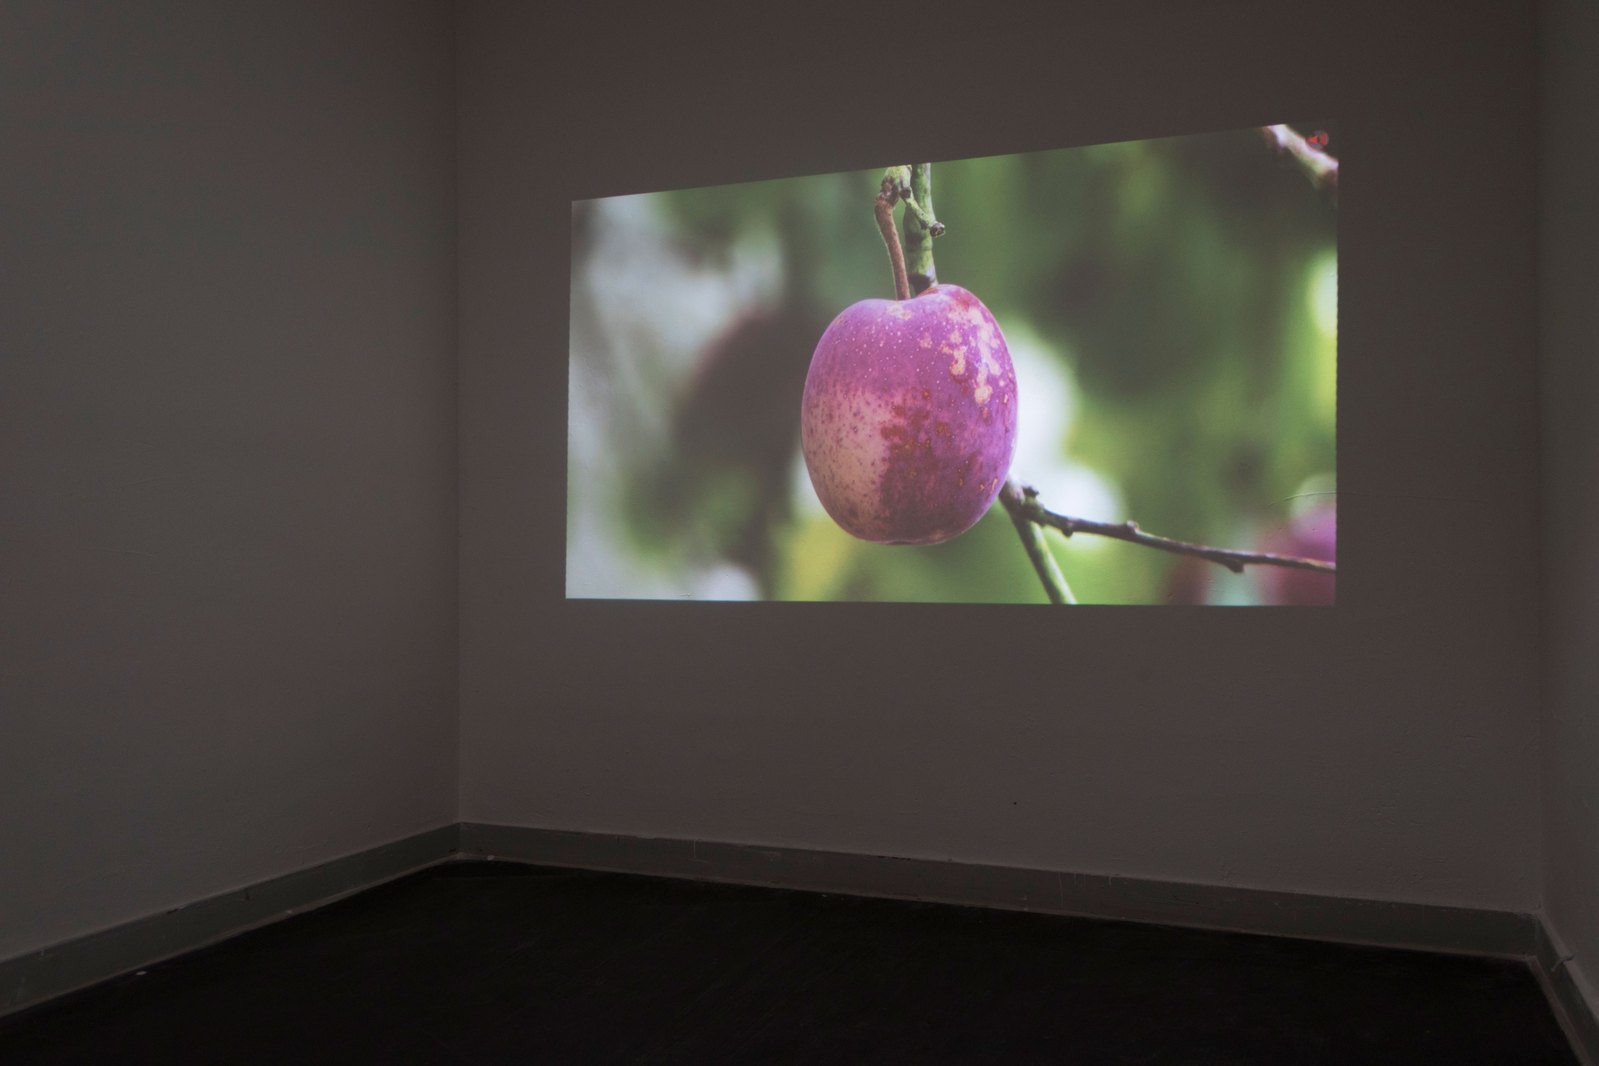 A video projection in a dark room, with an image of a plum . Jamie Kane